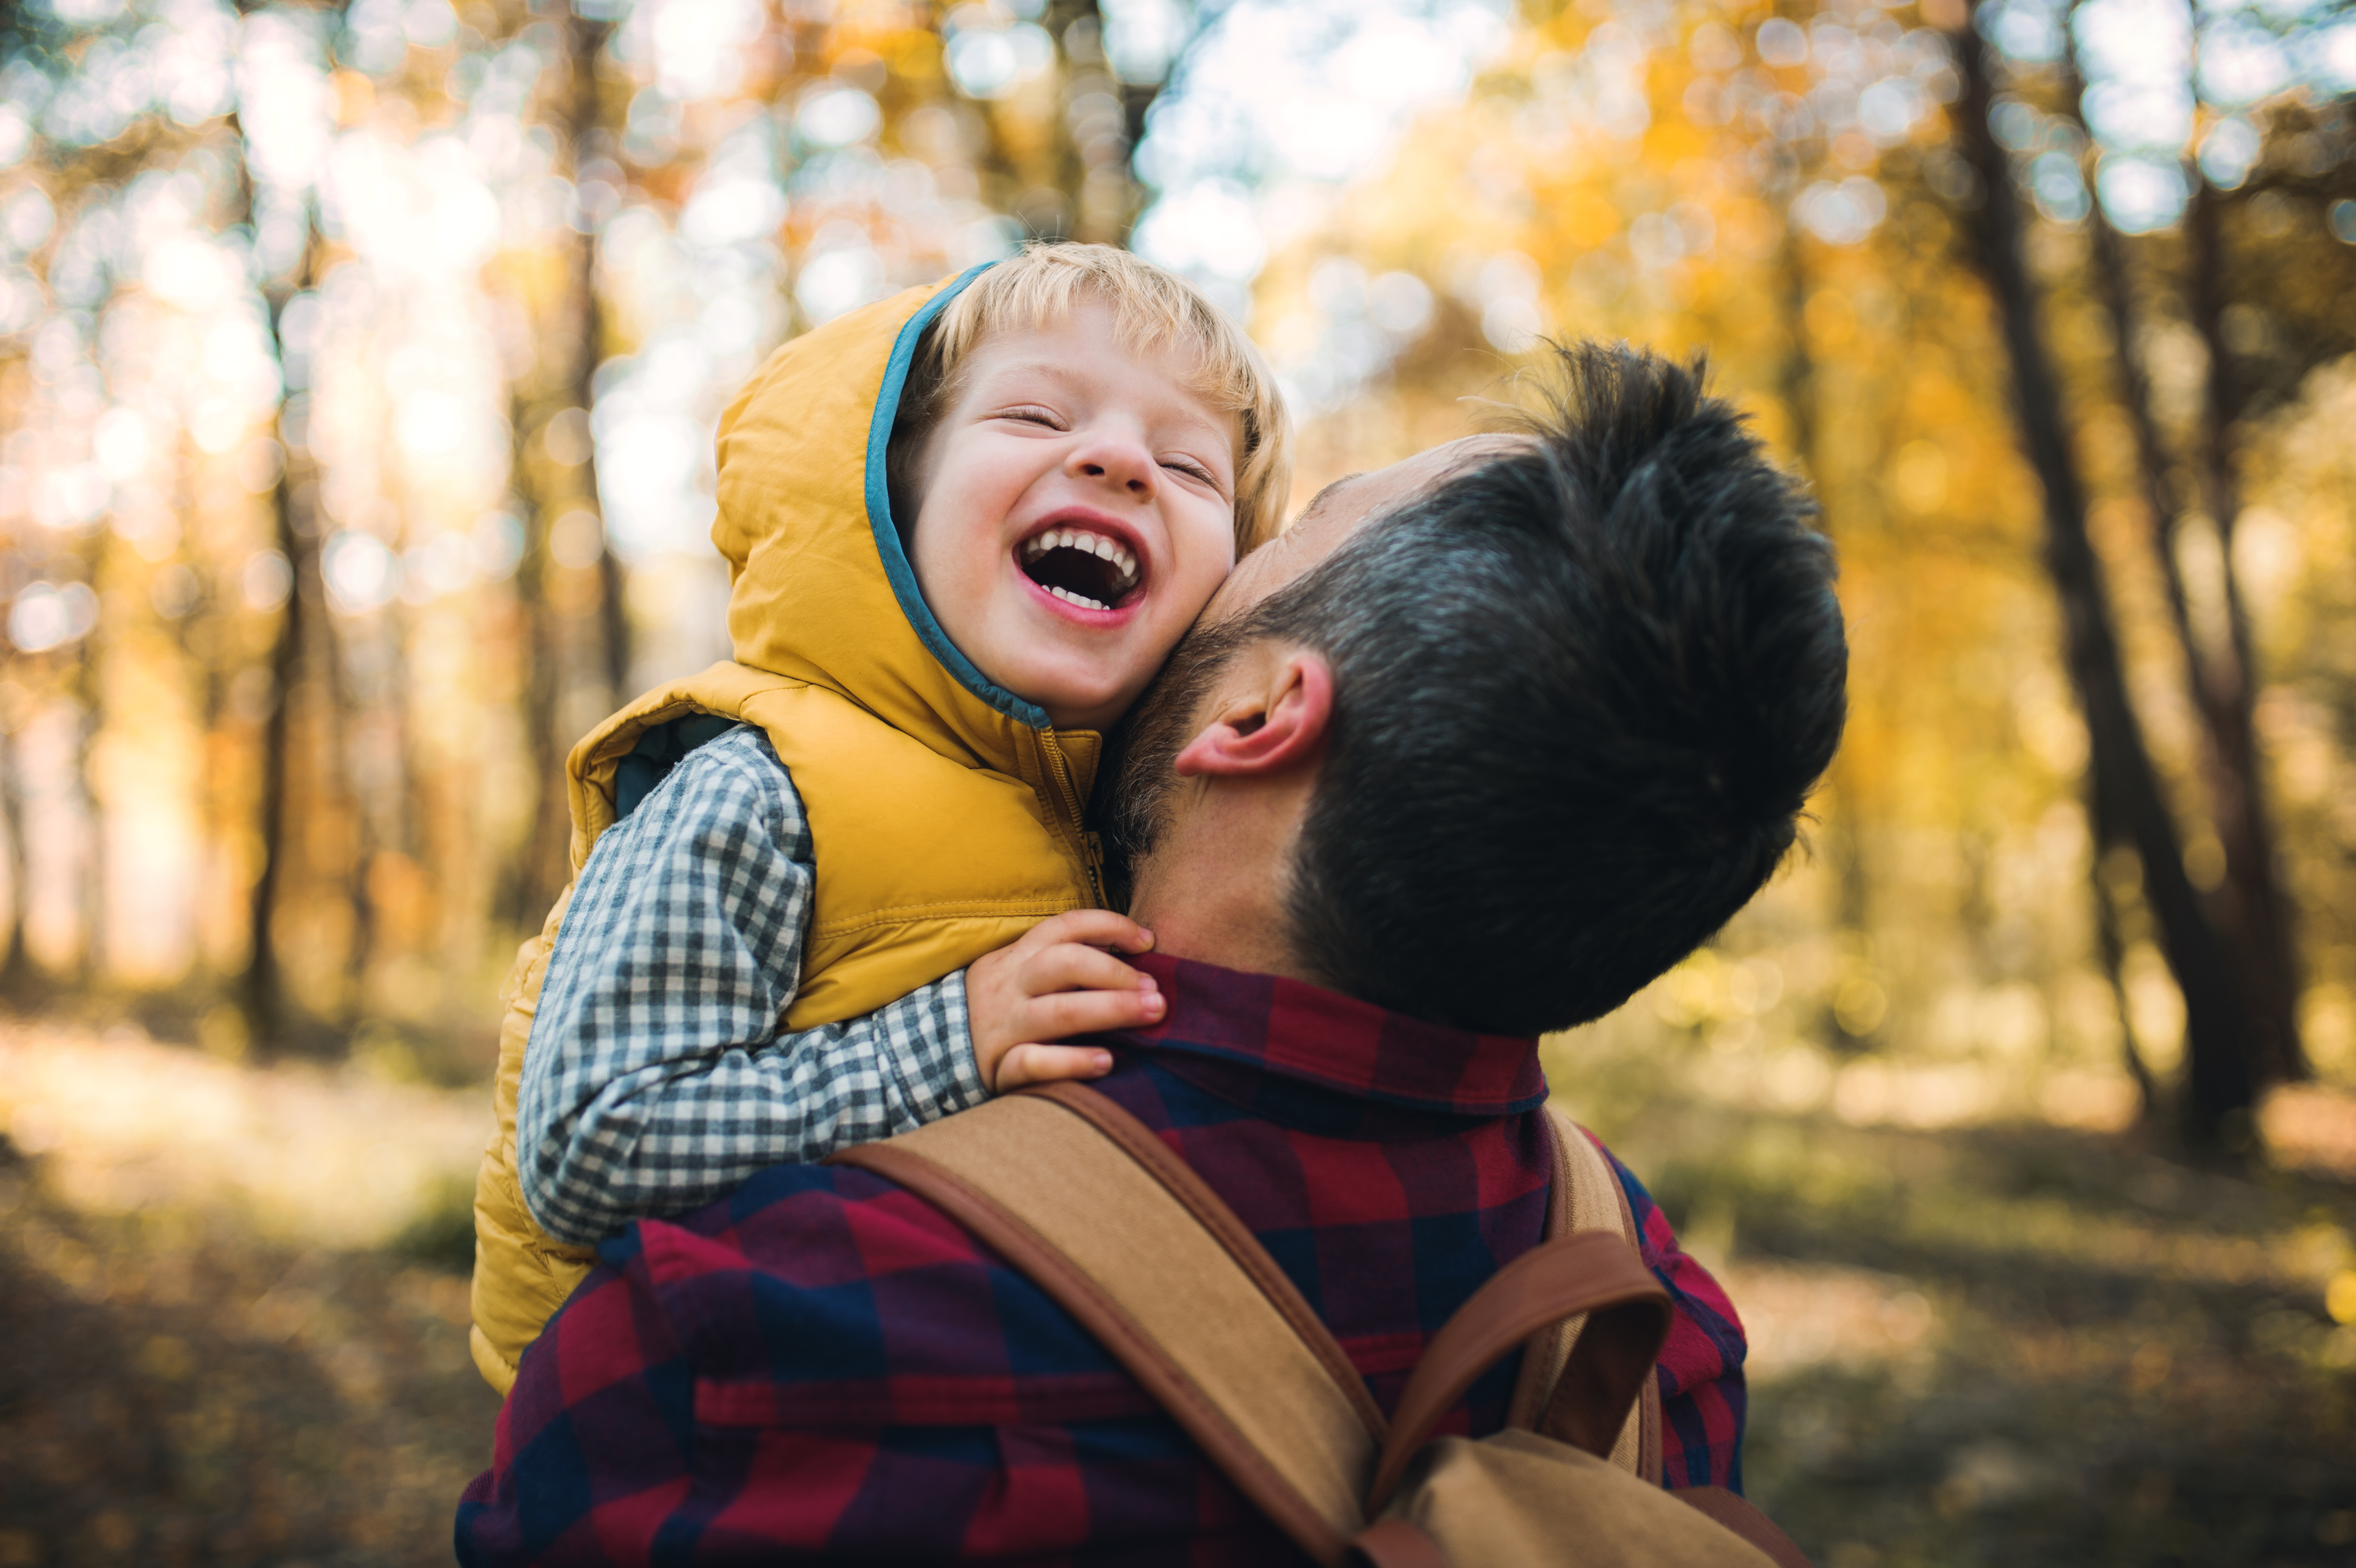 Child and father laughing in forest